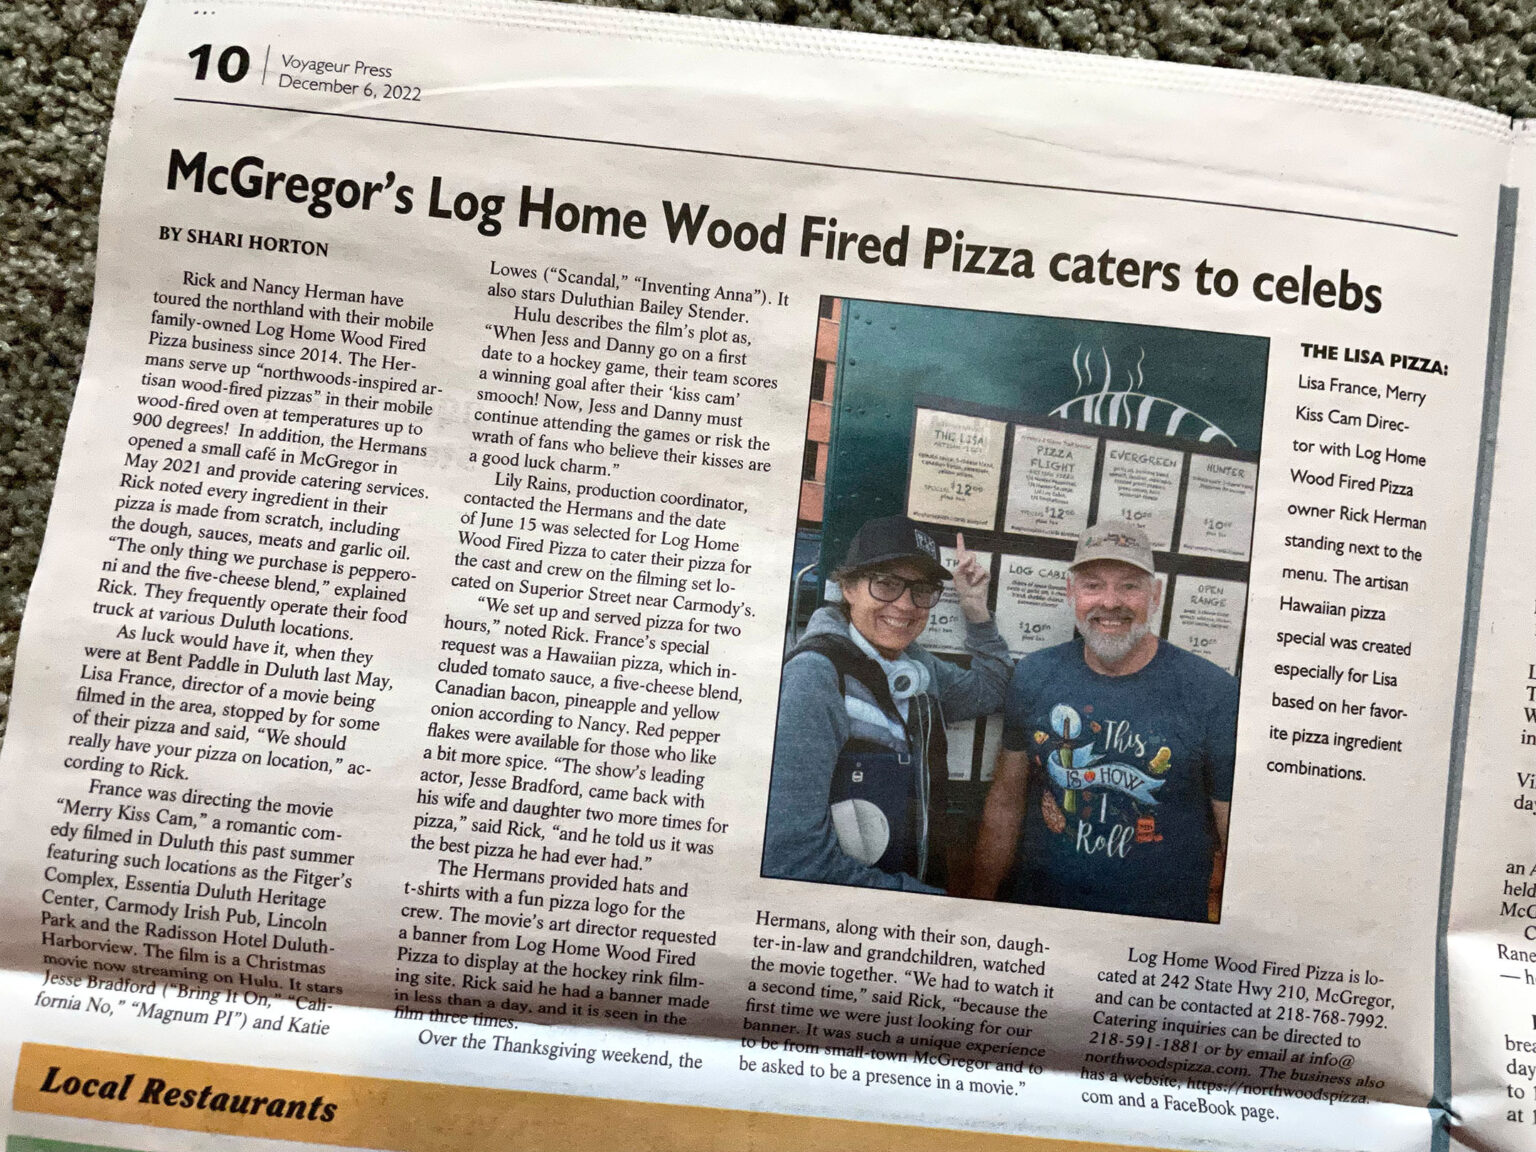 Log Home Wood Fired Pizza, McGregor, MN, Merry Kiss Cam